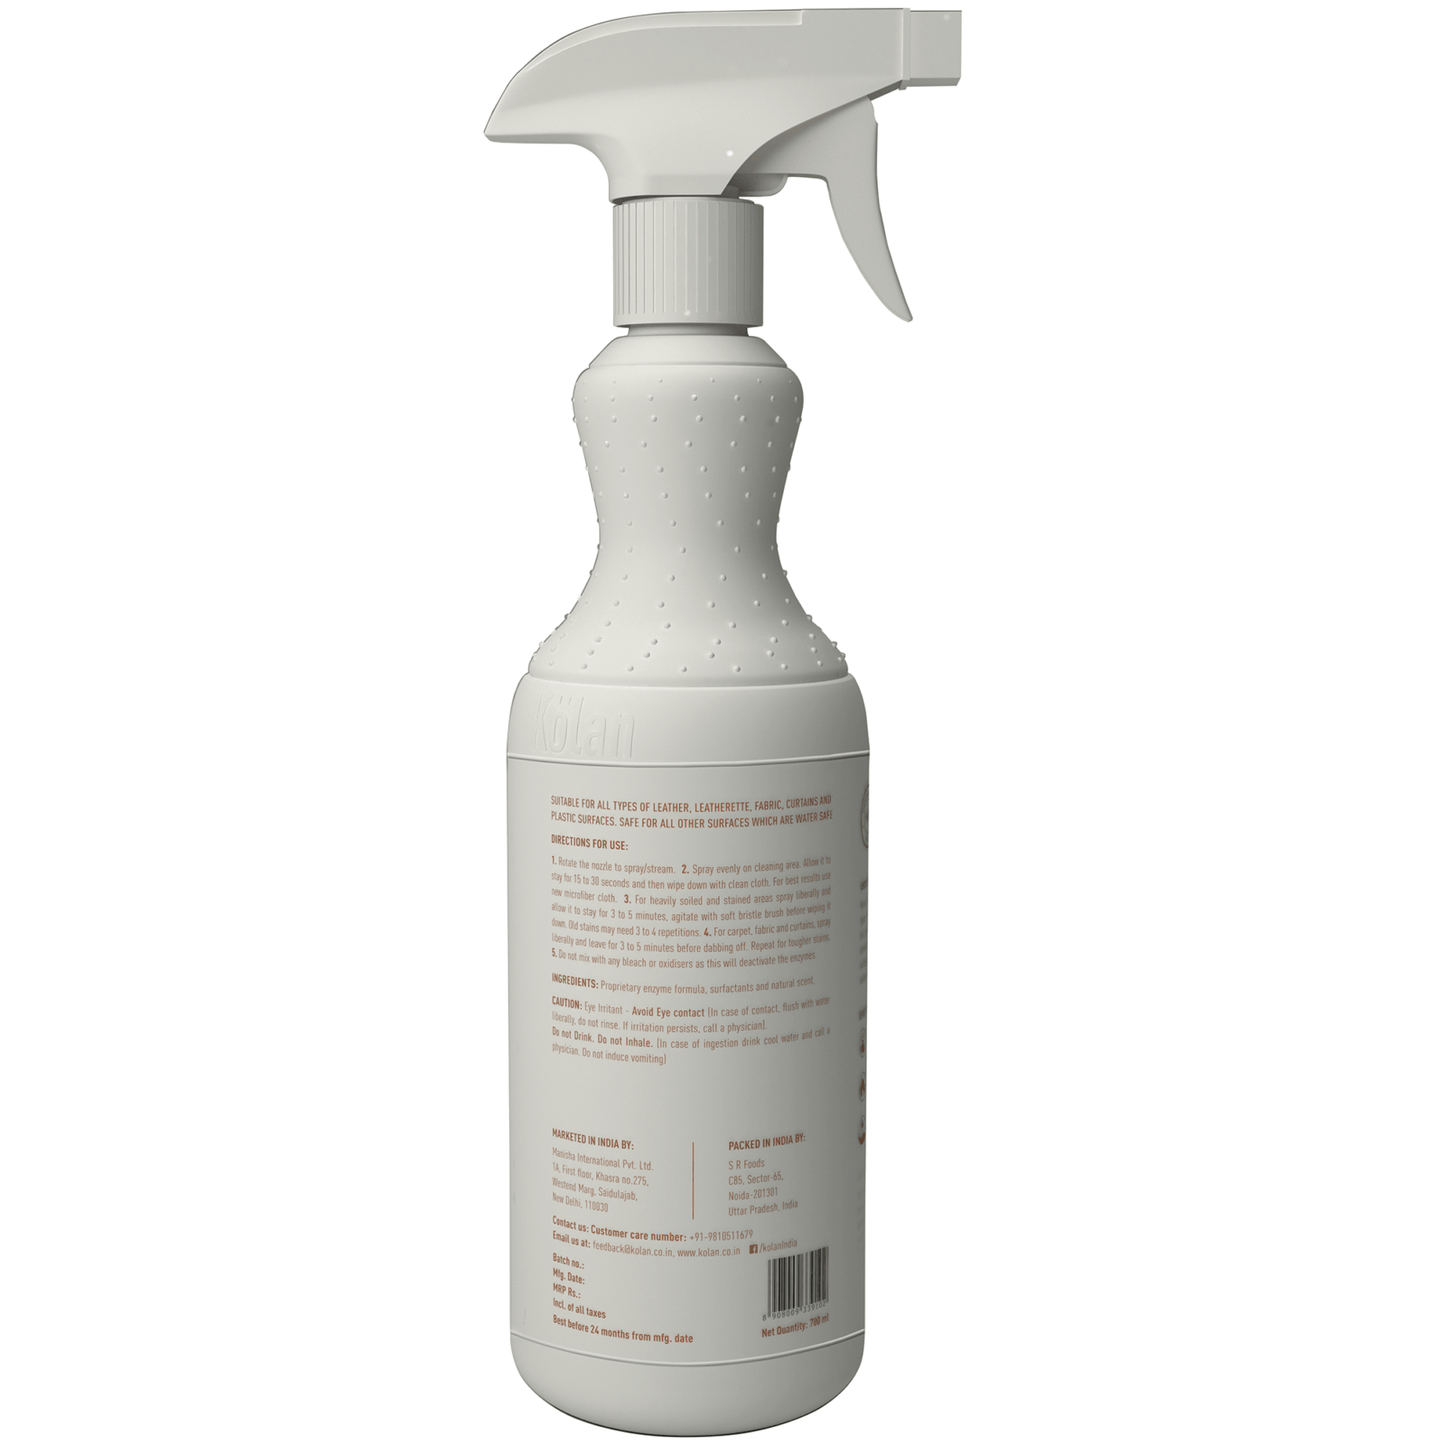 Kolan- Leather and Upholstery Cleaner 700ML